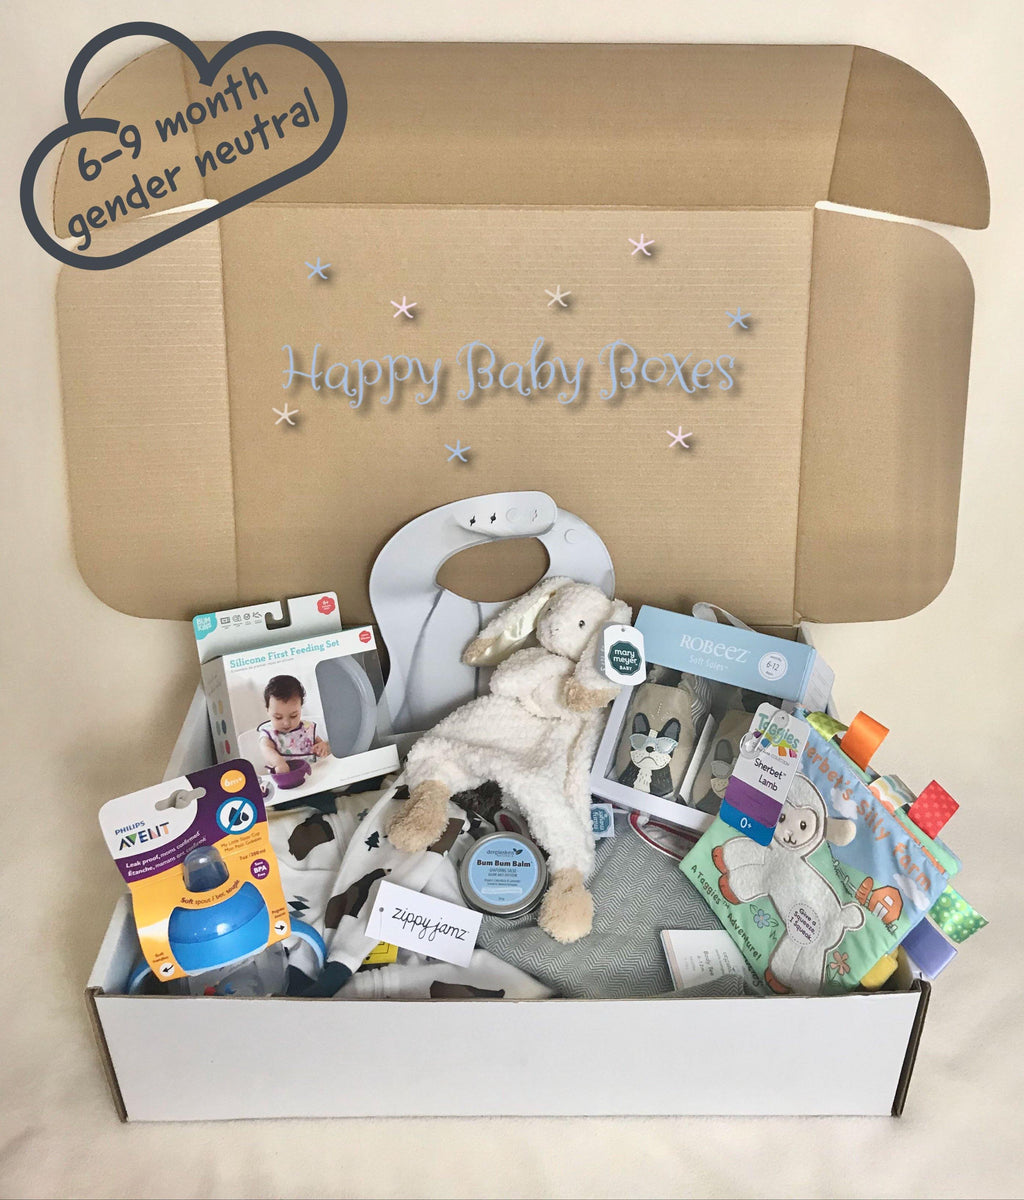 6-9 Month Baby Box - Happy Baby Boxes